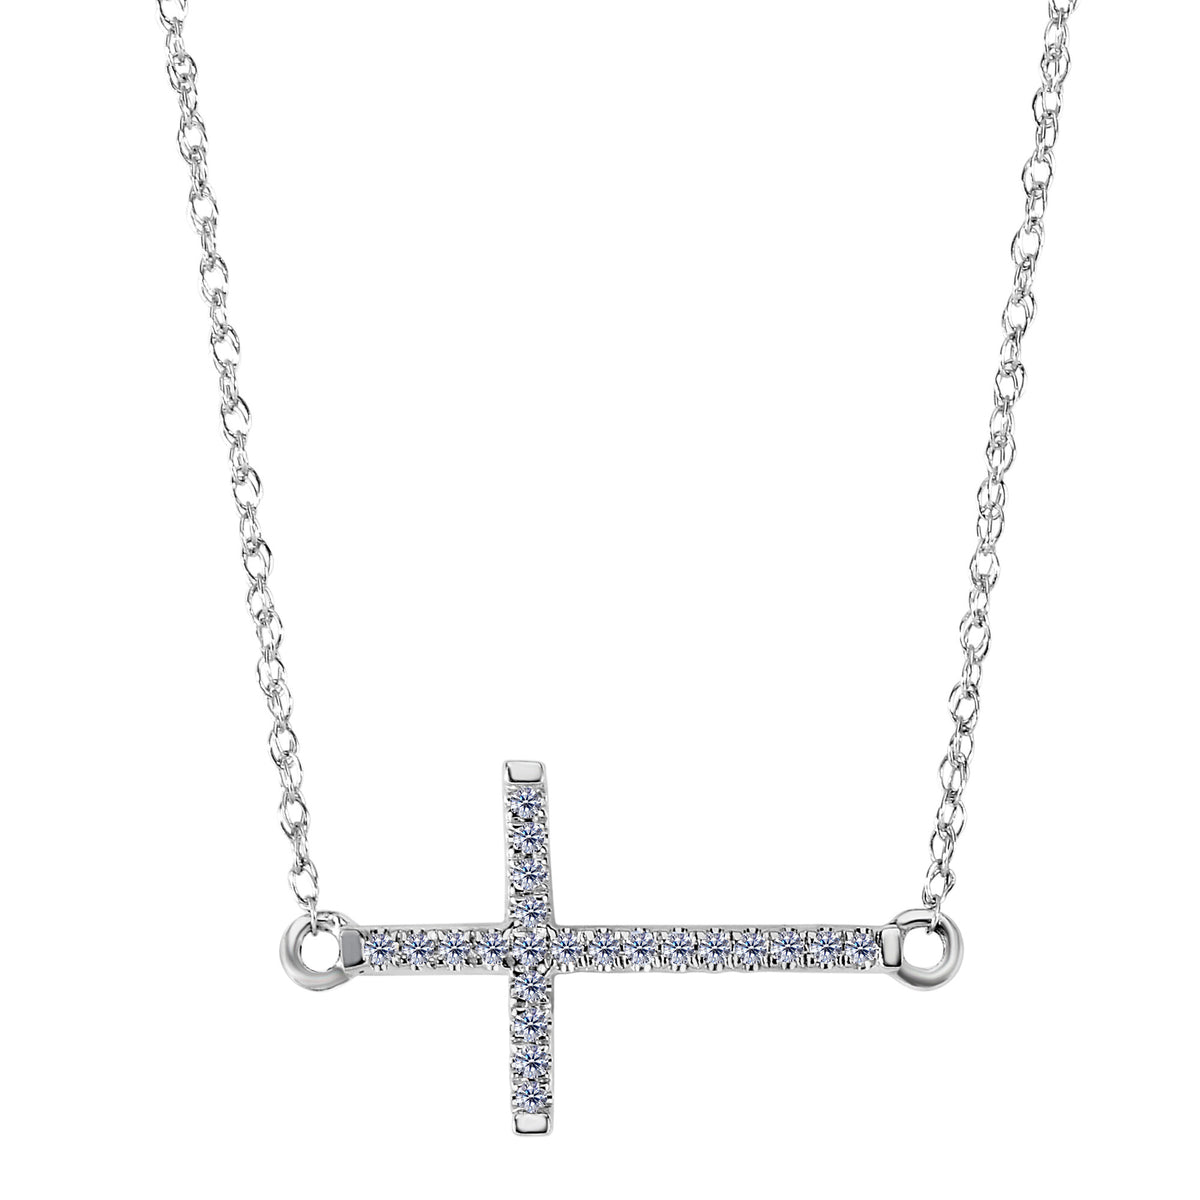 14k White Gold With 0.05ct Diamonds Side Ways Cross Necklace - 18 Inches fine designer jewelry for men and women